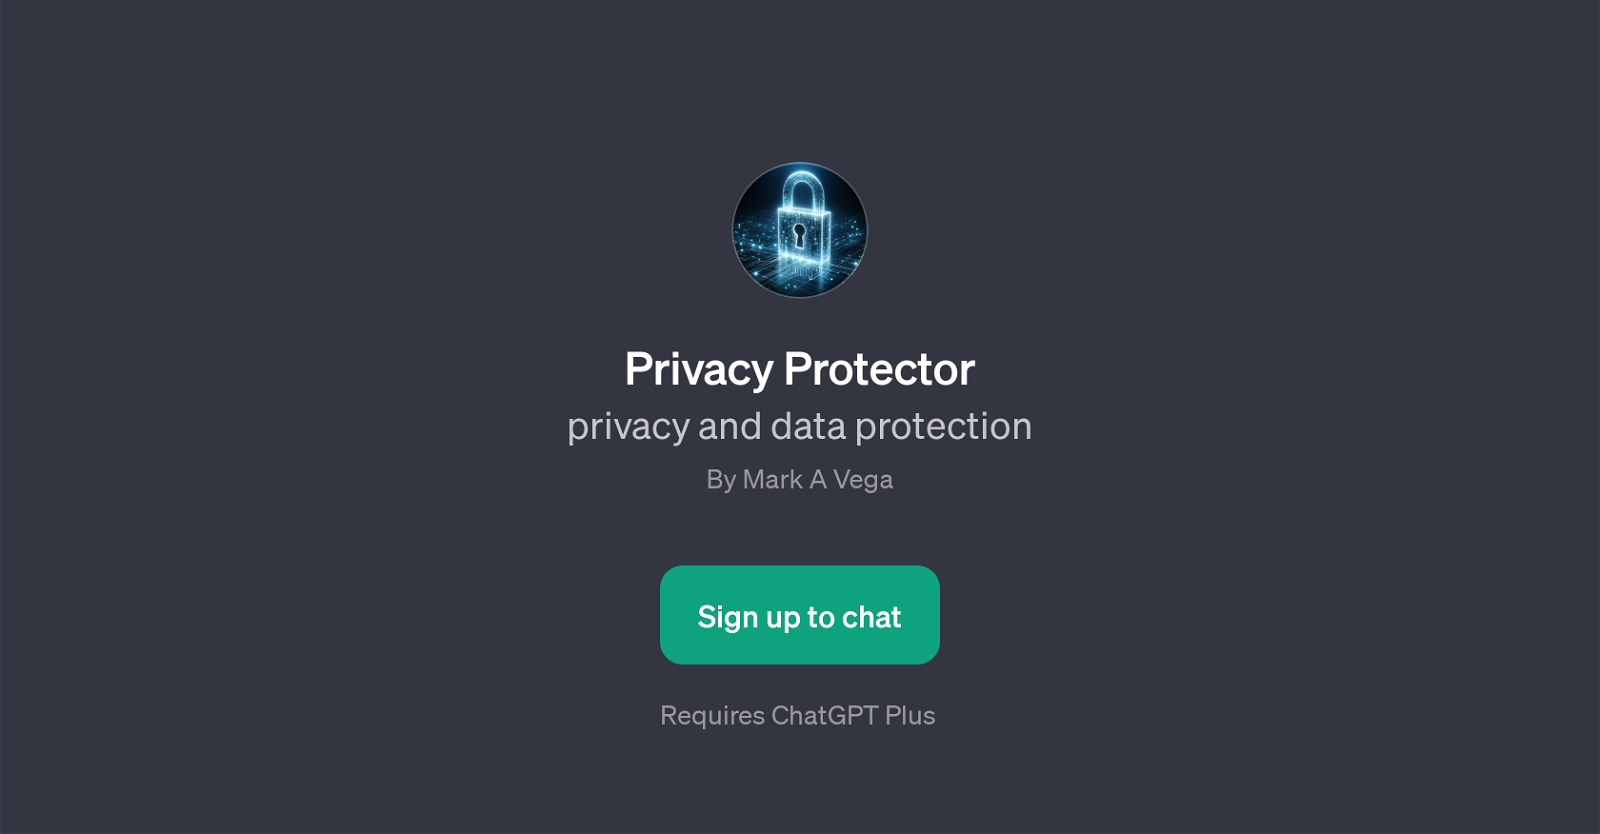 Privacy Protector website